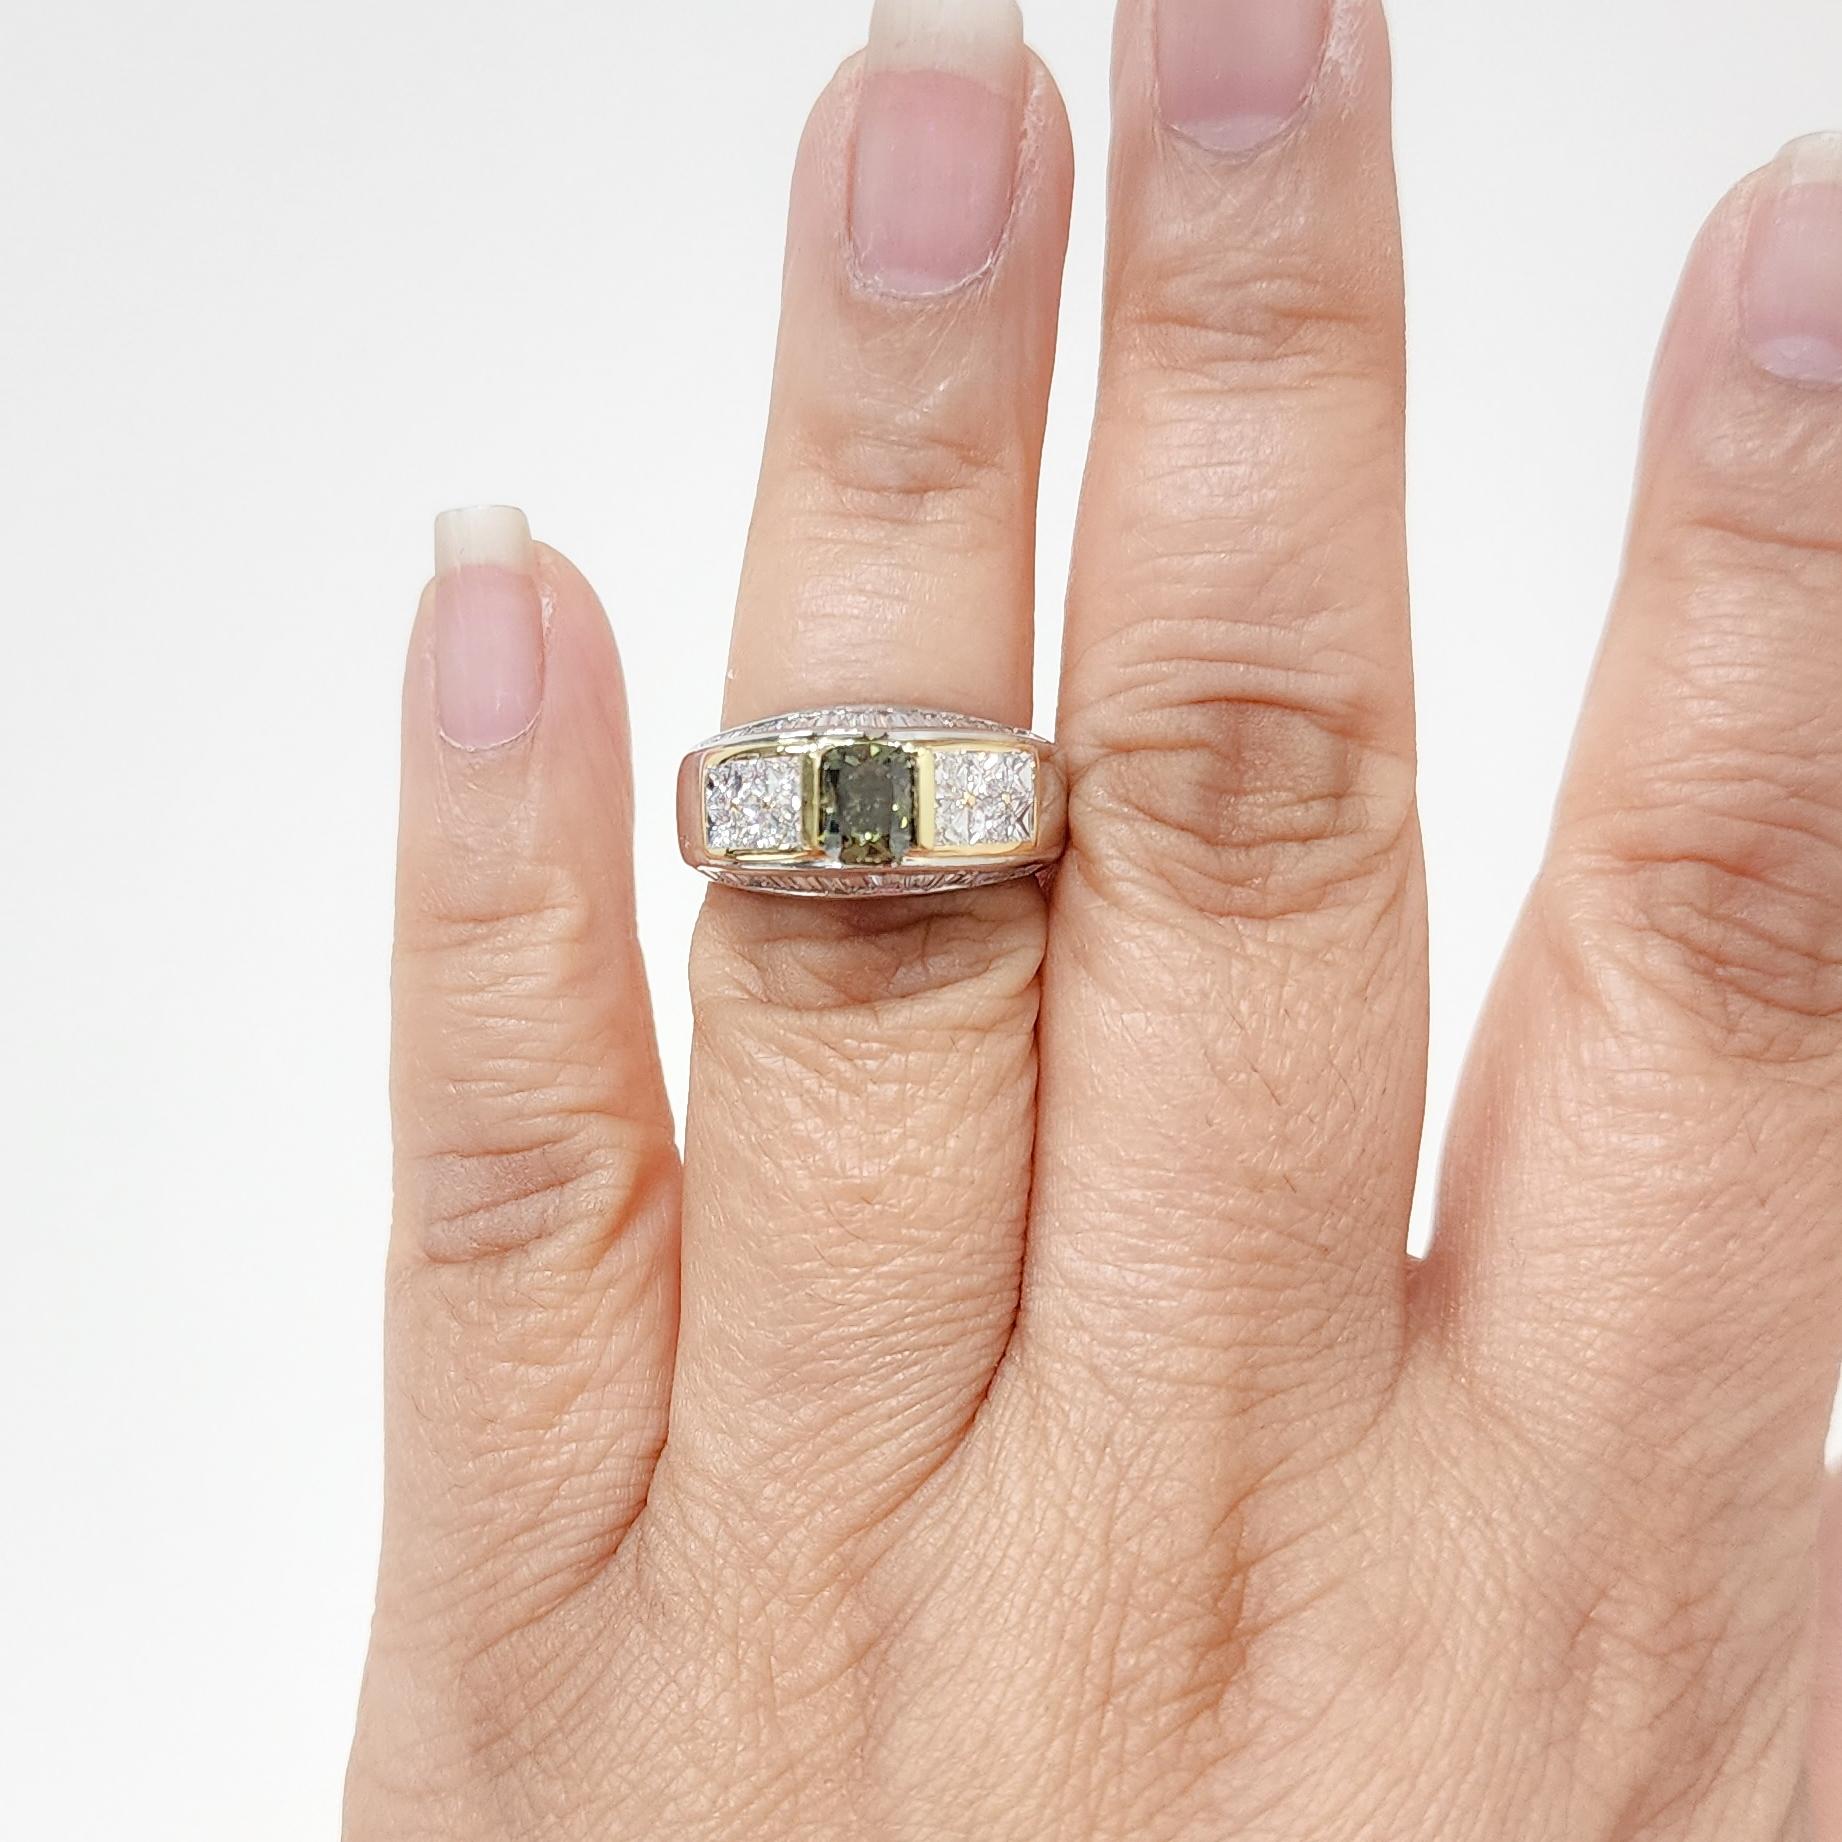 Gorgeous 1.01 ct. green diamond cushion with white diamond squares and baguettes.  Handmade mounting in platinum and 18k yellow gold.  GIA certificate included.  Ring size 7.